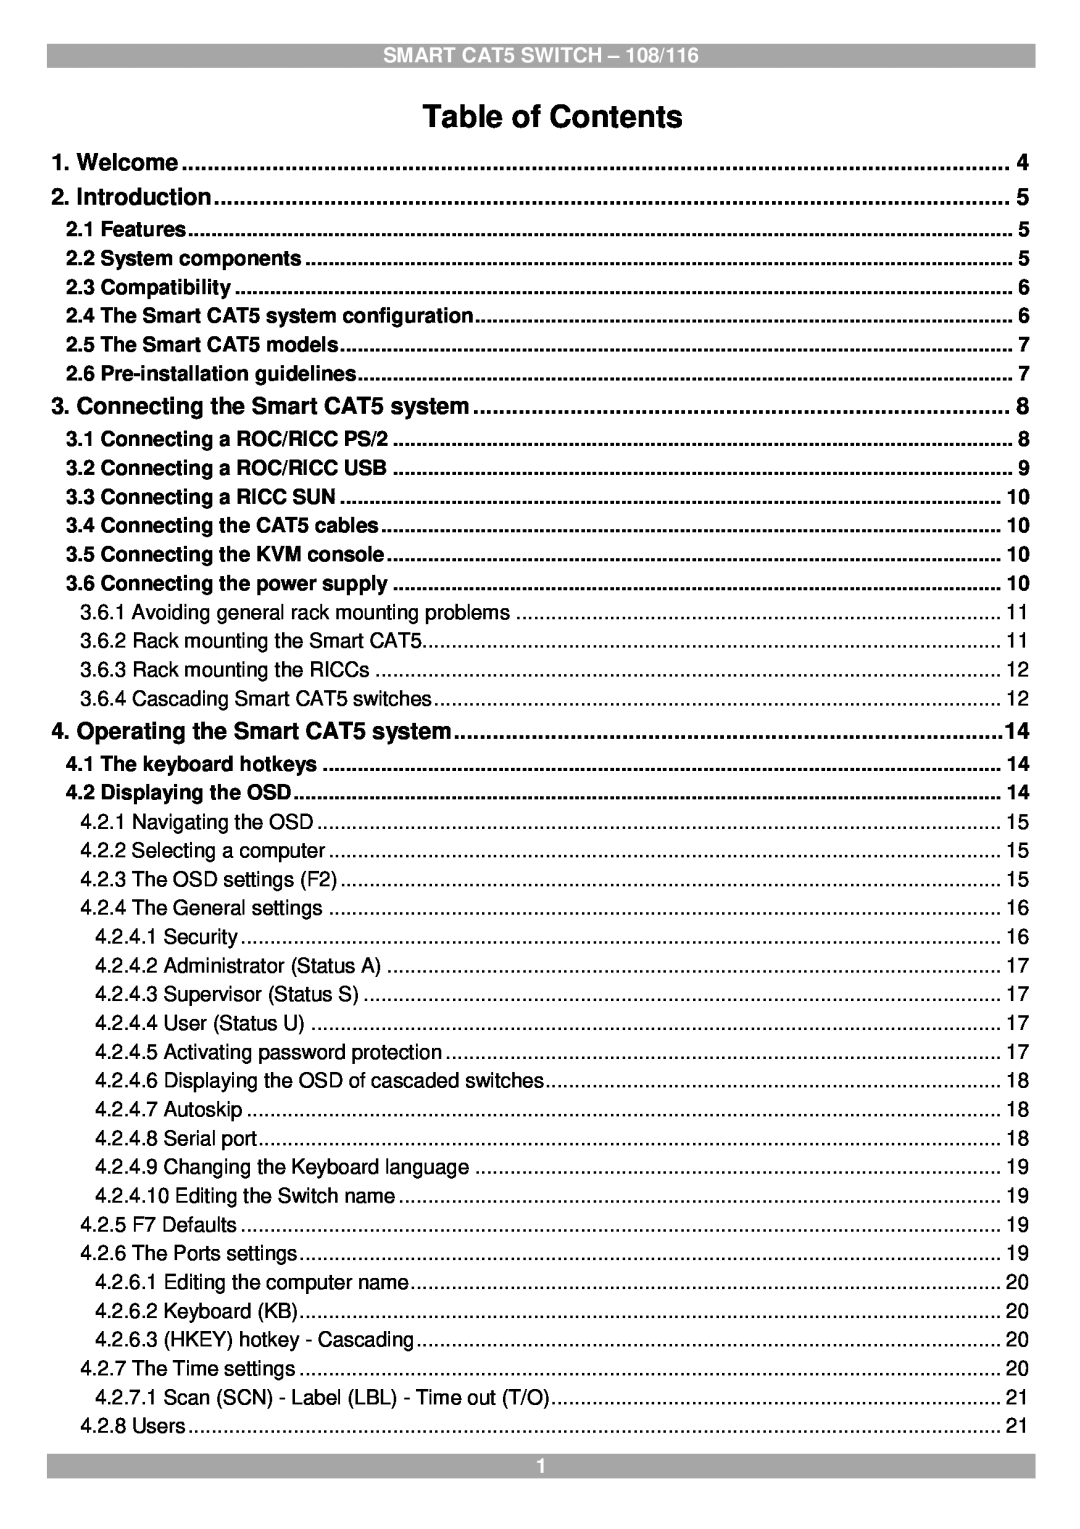 Tripp Lite manual Table of Contents, SMART CAT5 SWITCH - 108/116, Features, Connecting a RICC SUN, Displaying the OSD 